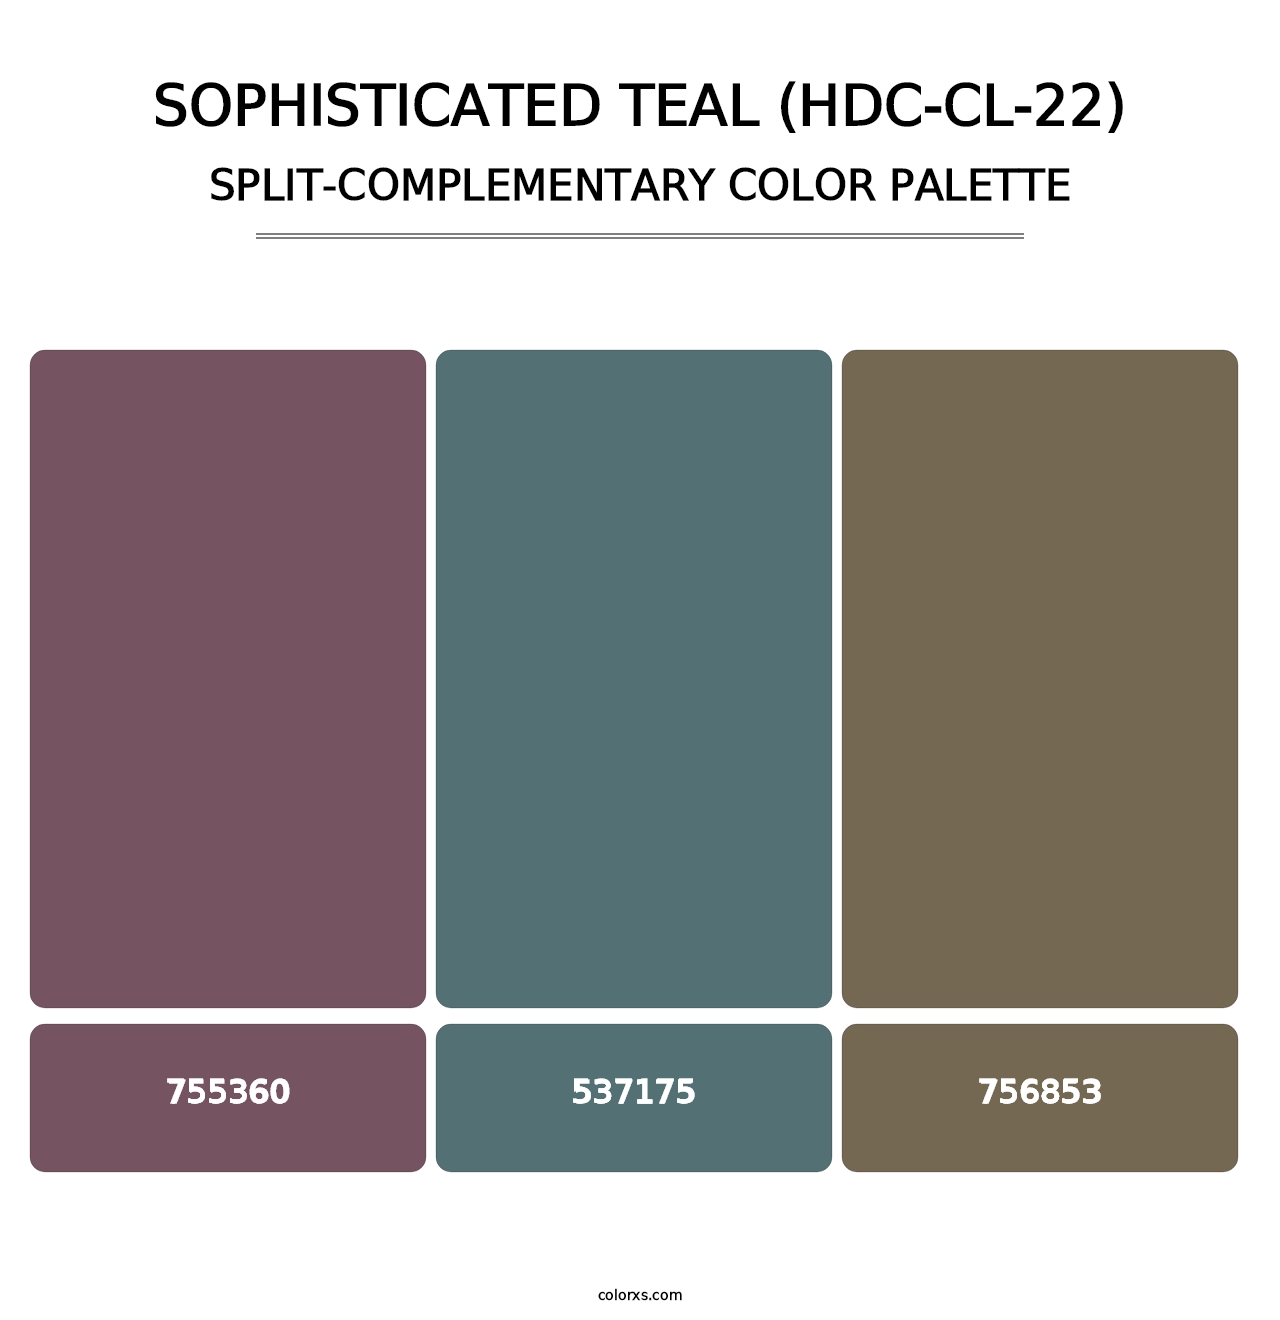 Sophisticated Teal (HDC-CL-22) - Split-Complementary Color Palette